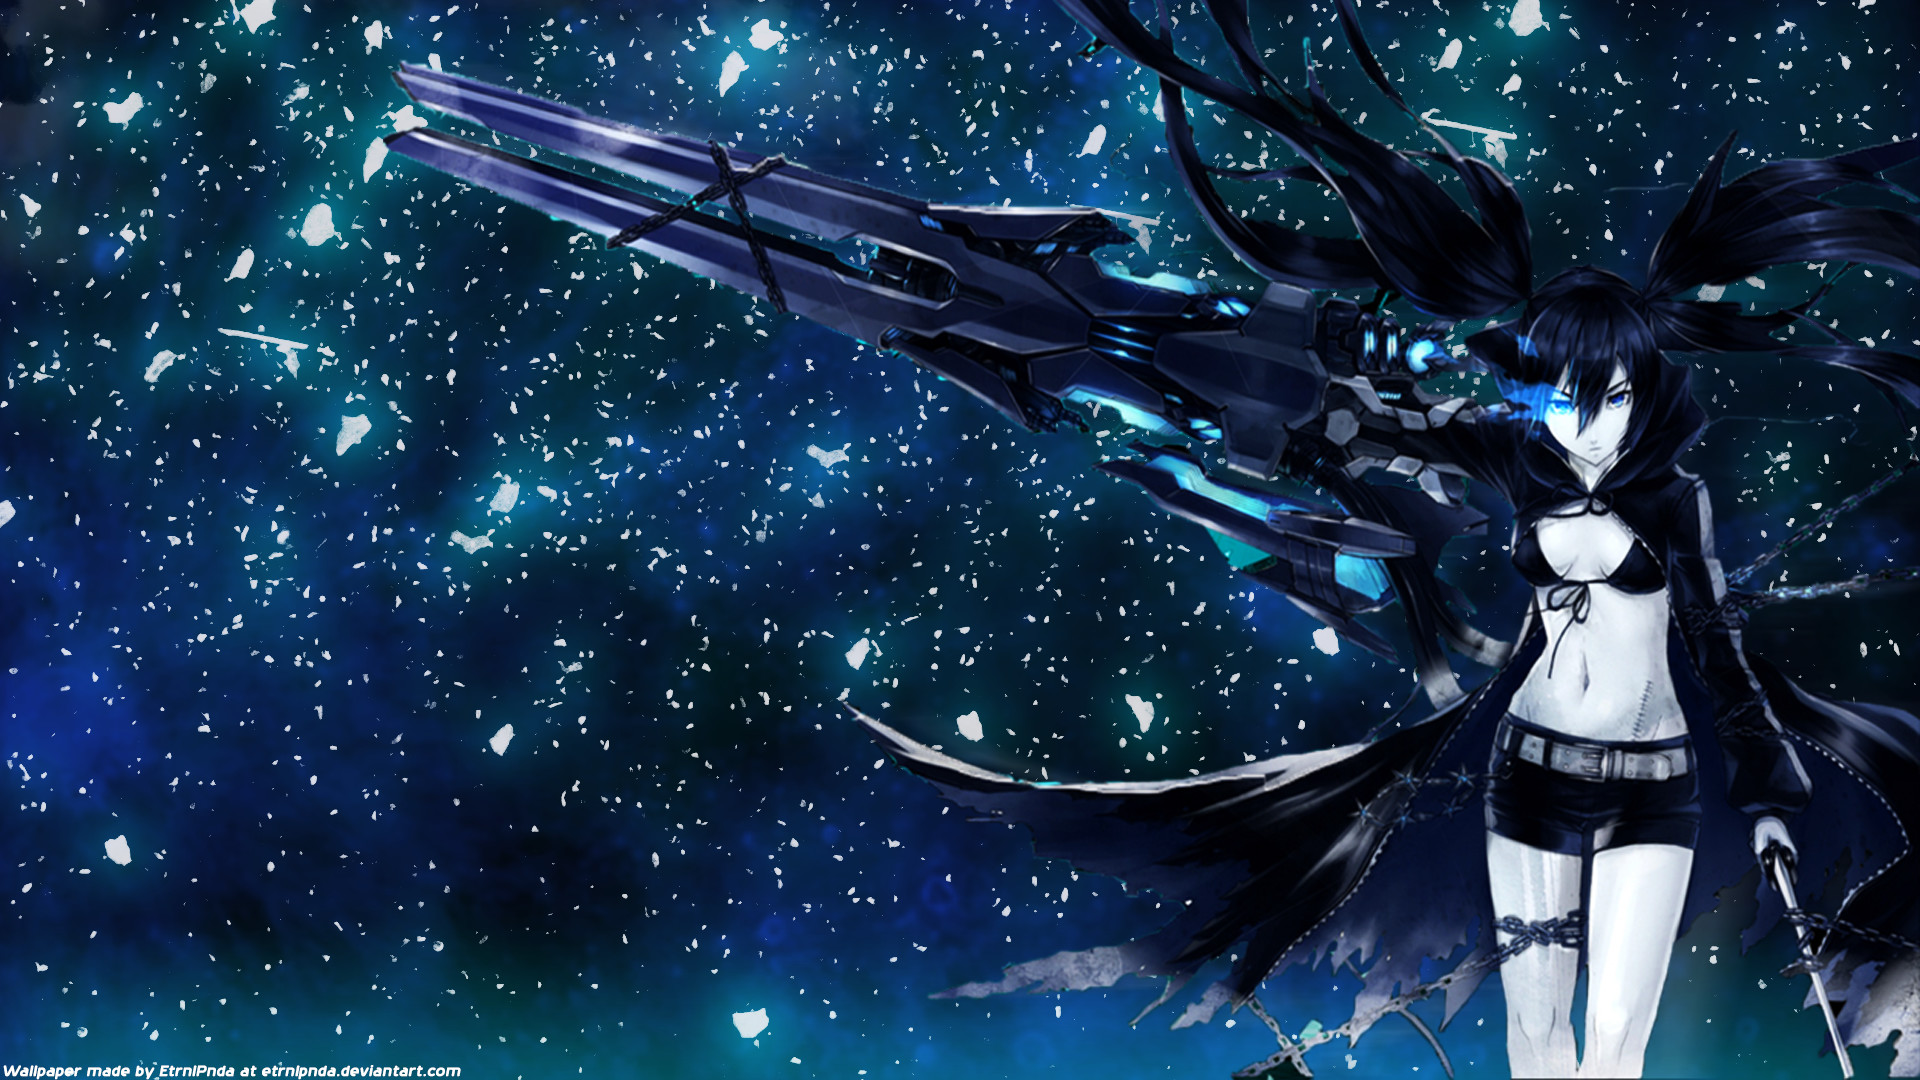 Black Rock Shooter Wallpapers Images